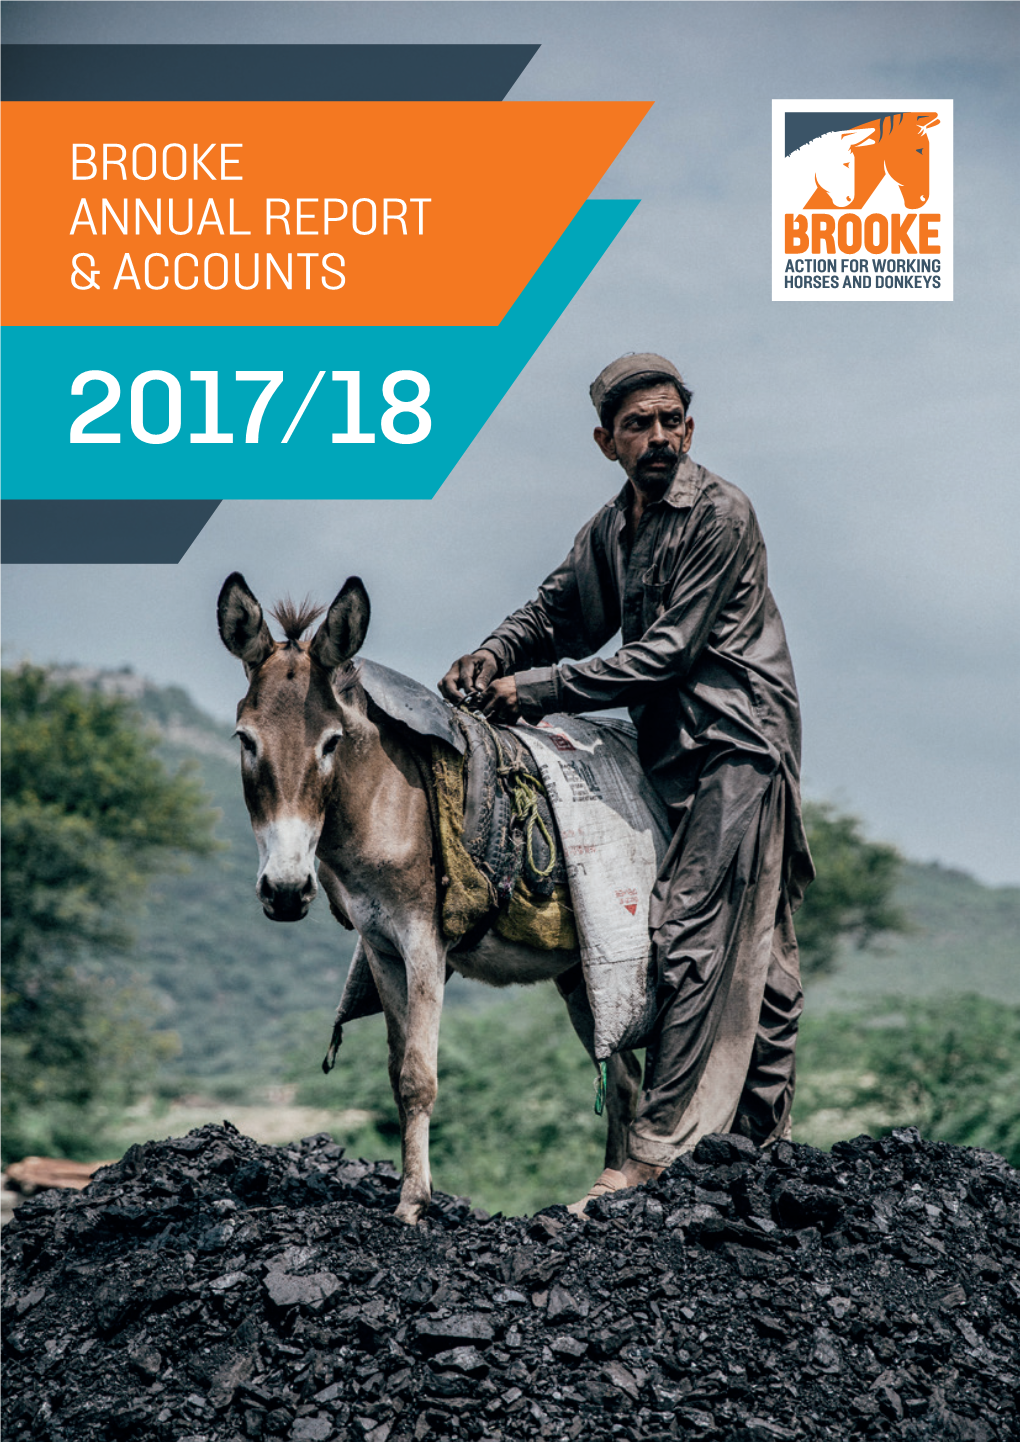 Annual Report and Accounts 2017-18